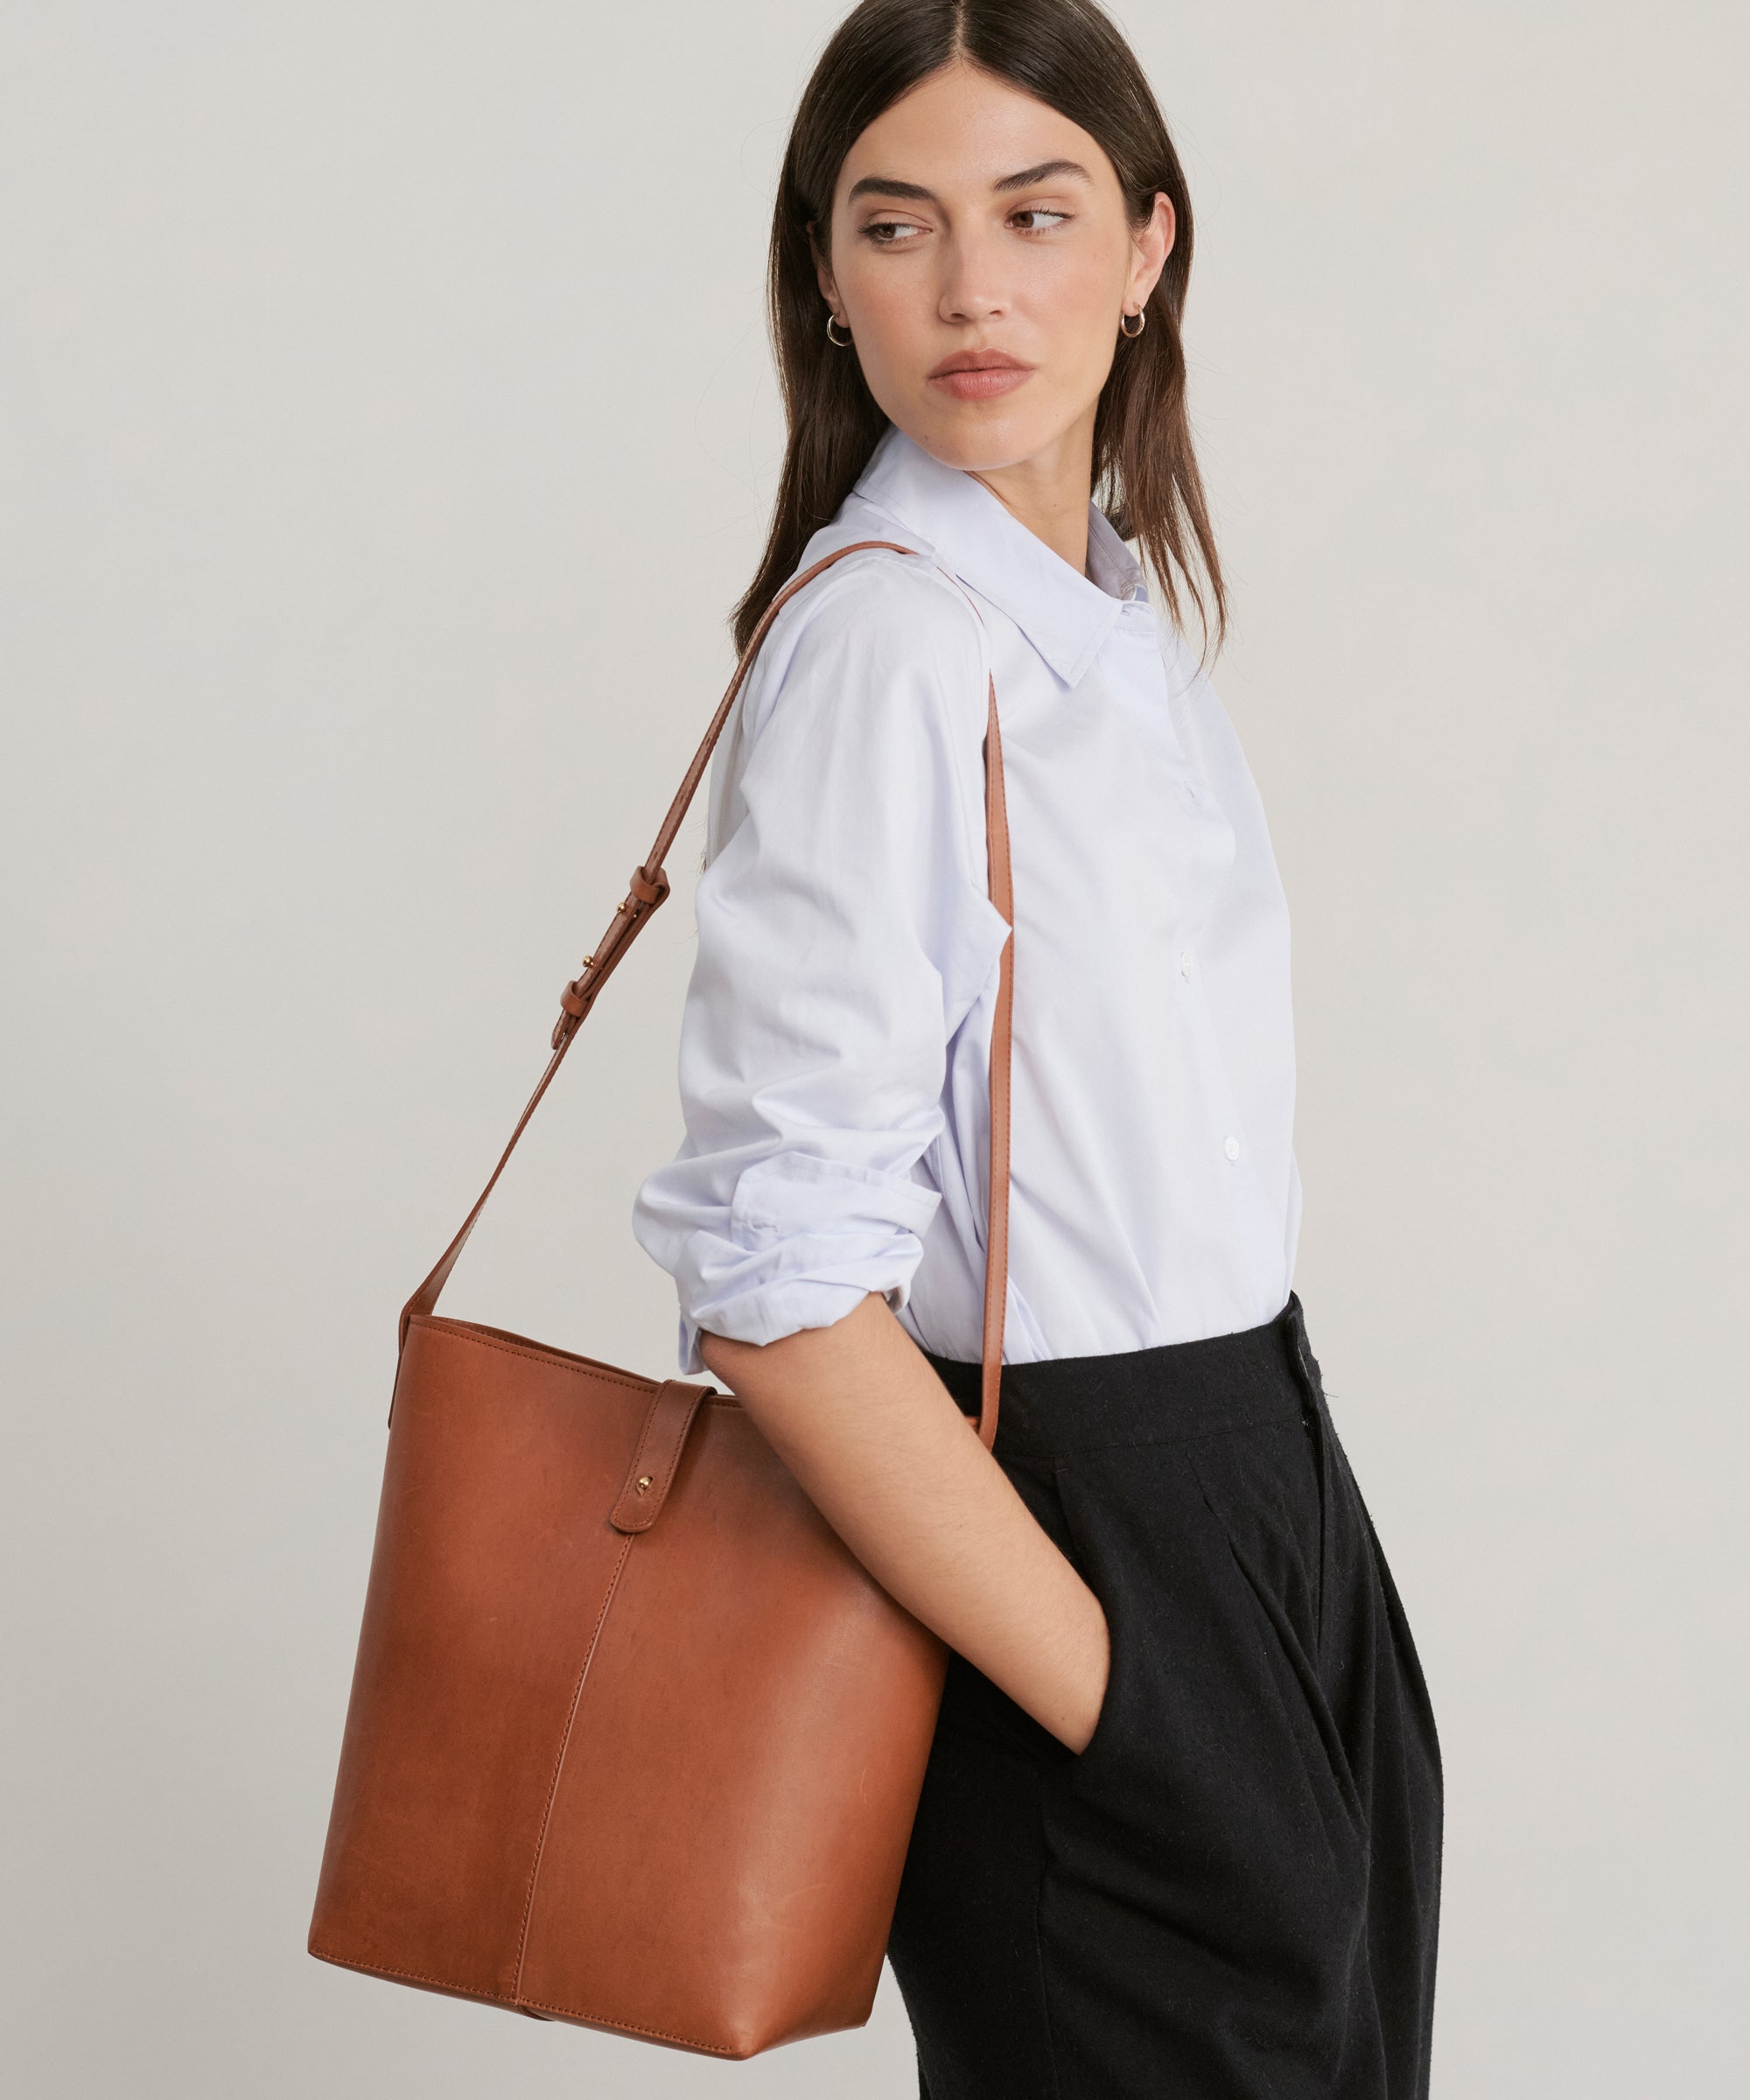 Women Purse Eclusive Leather Bag Real Handmade Office 